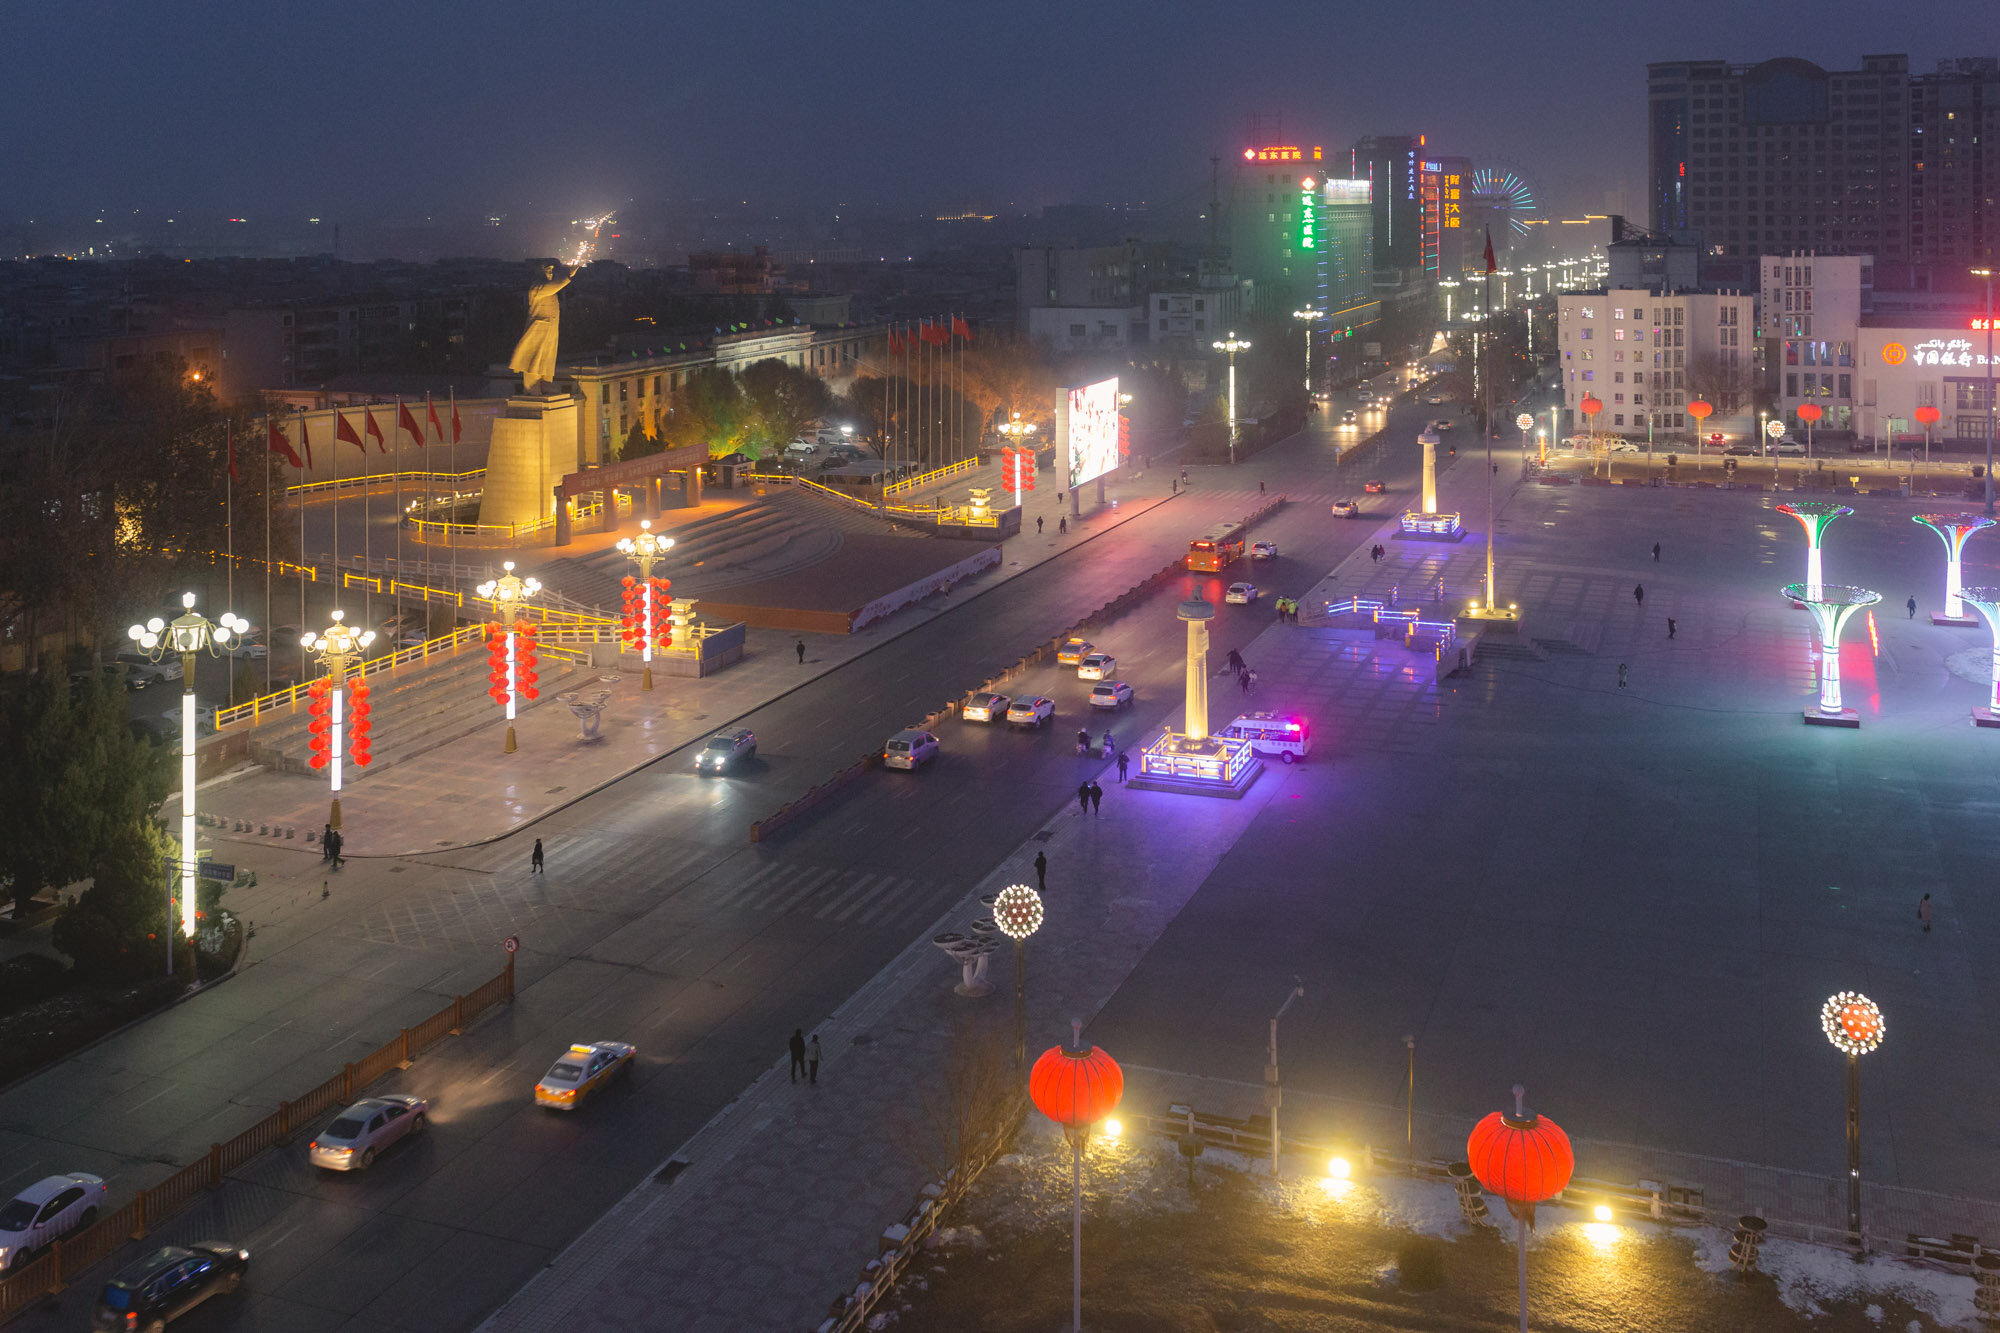  January 31st 2019. Kashgar, Xinjiang province. Night view over People’s Square and the massive Mao statue reigning over it. 